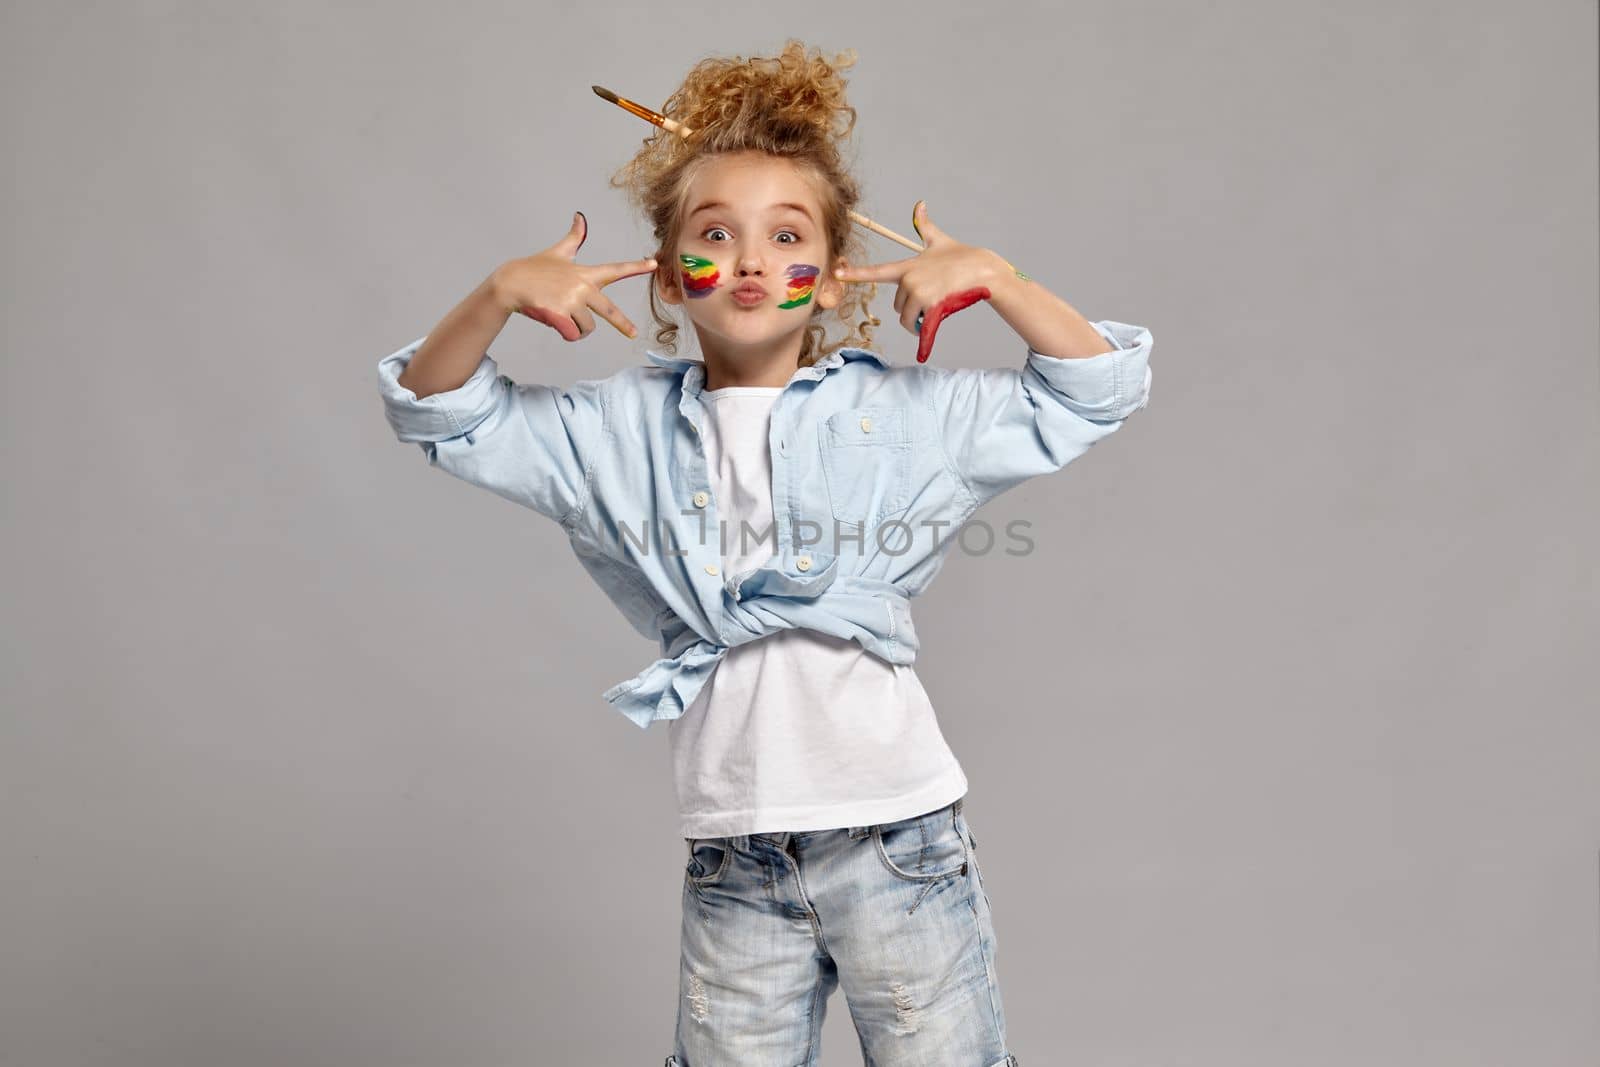 Pretty schoolgirl having a brush in her chic hairstyle, wearing in a blue shirt and white t-shirt. She has painted her cheeks and pointing on them, giving a kiss at the camera on a gray background.